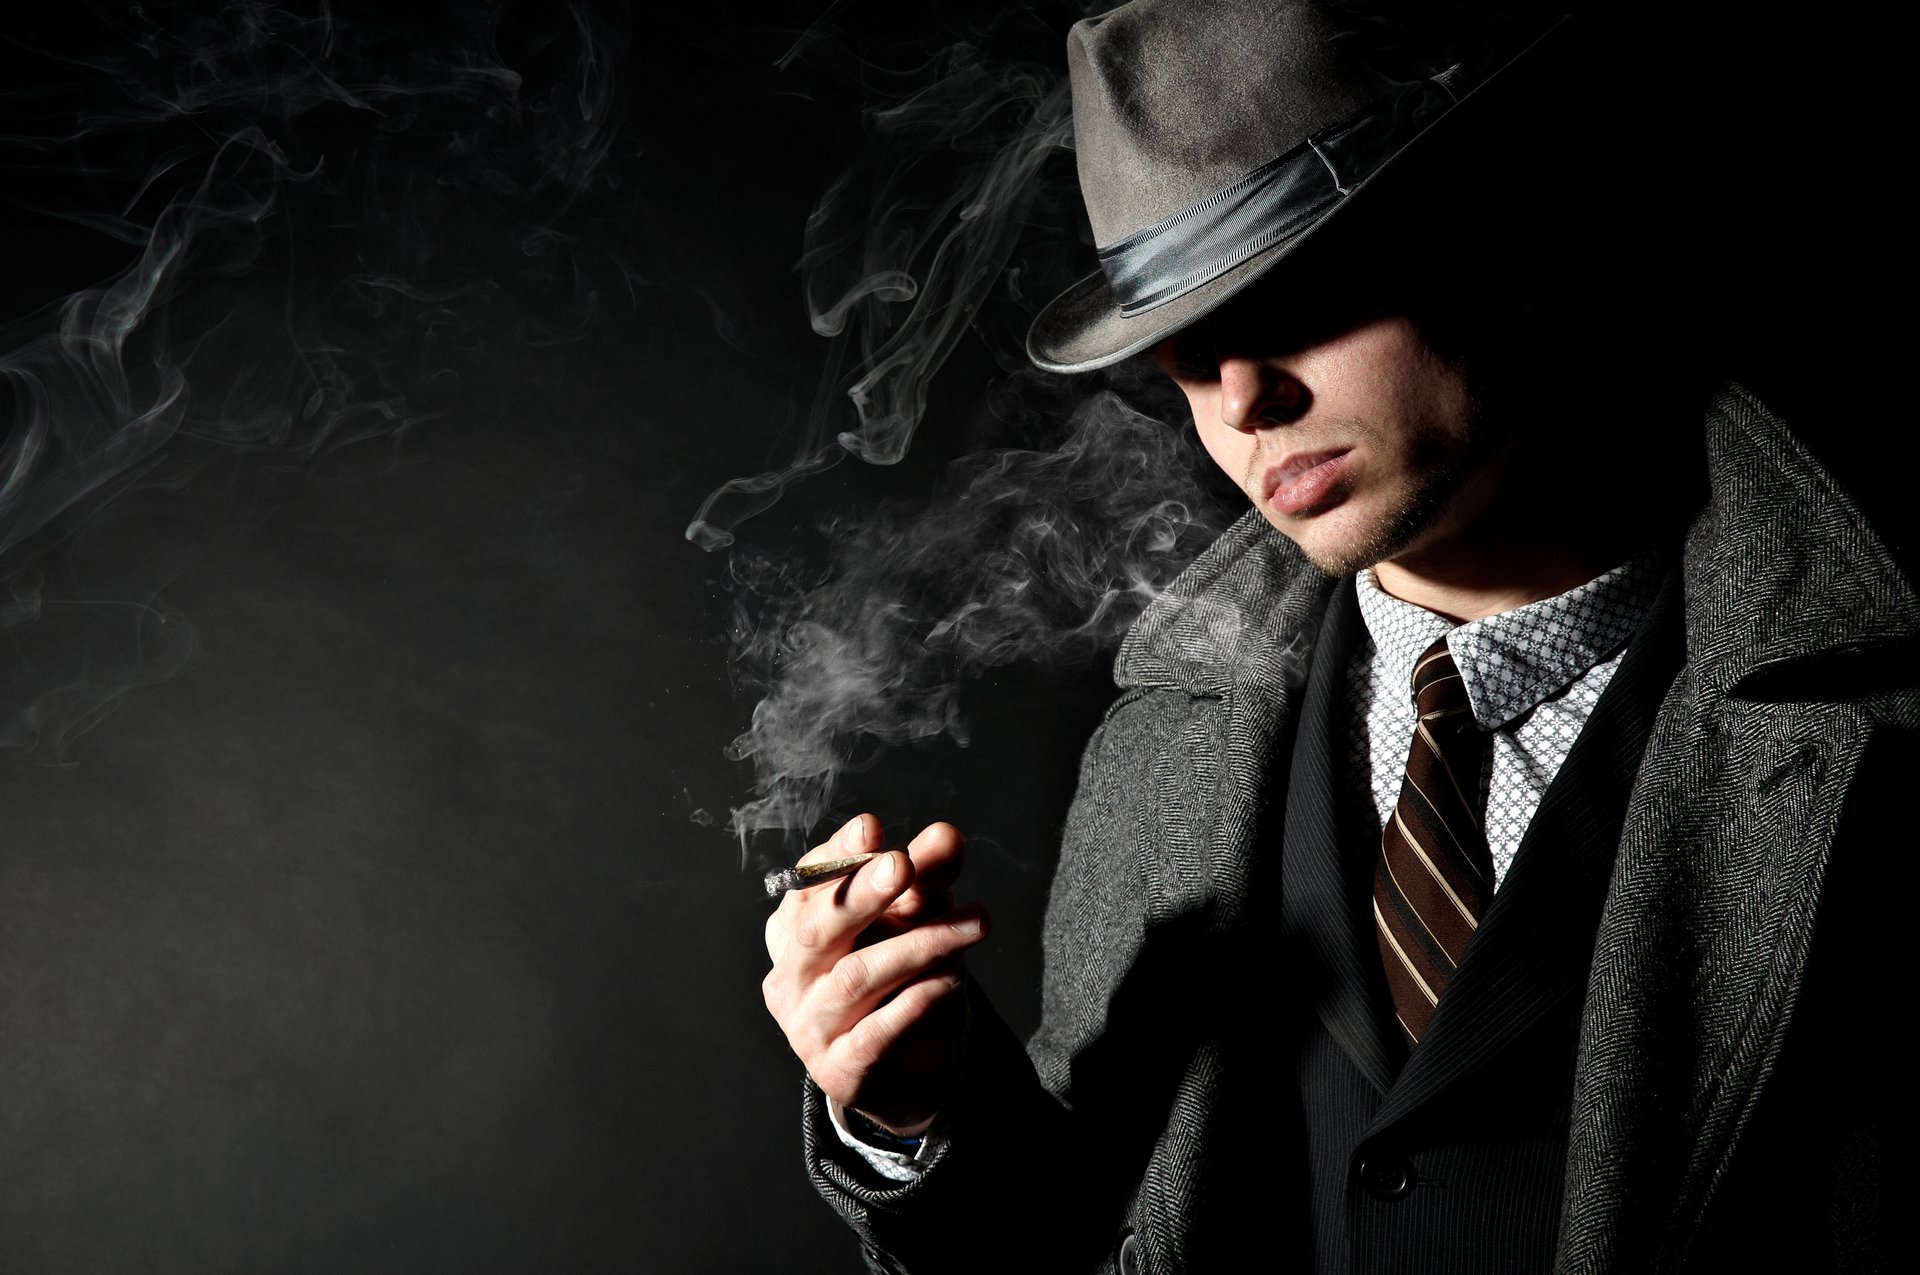 mafia wallpaper hd,darkness,suit,photography,formal wear,flash photography